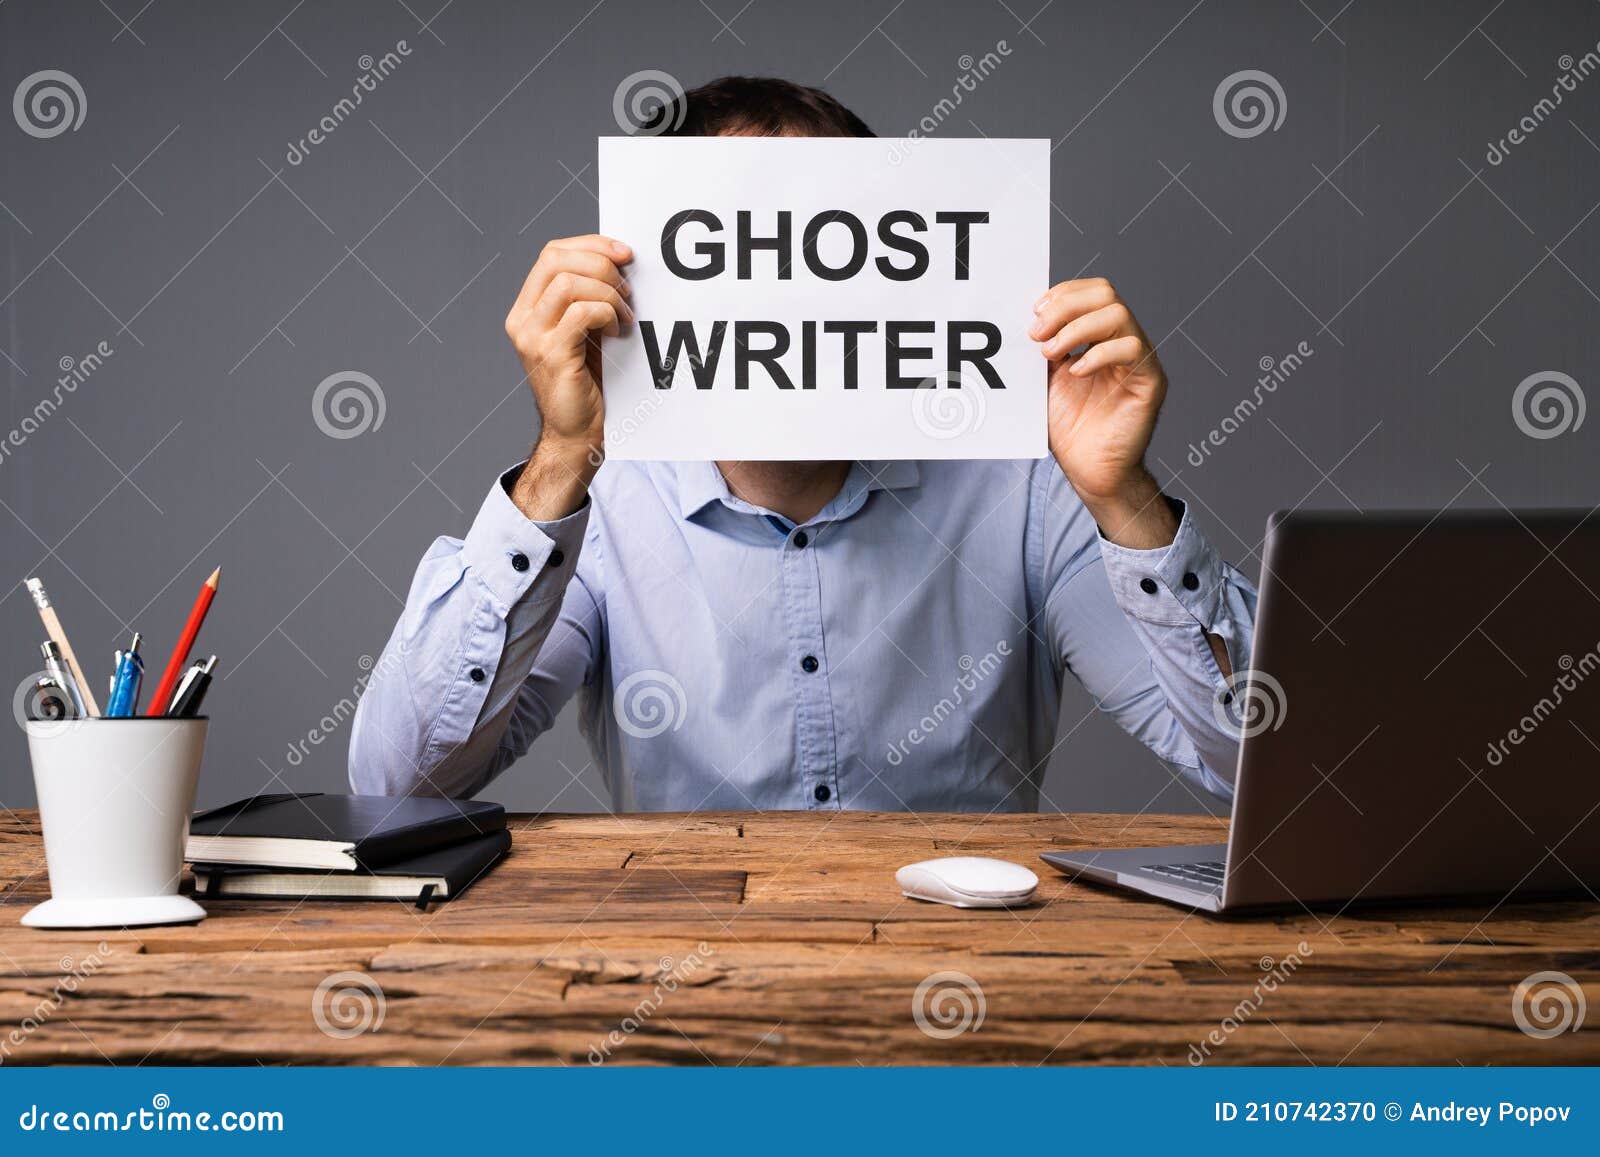 businessman hiding his face behind card with ghost writer text